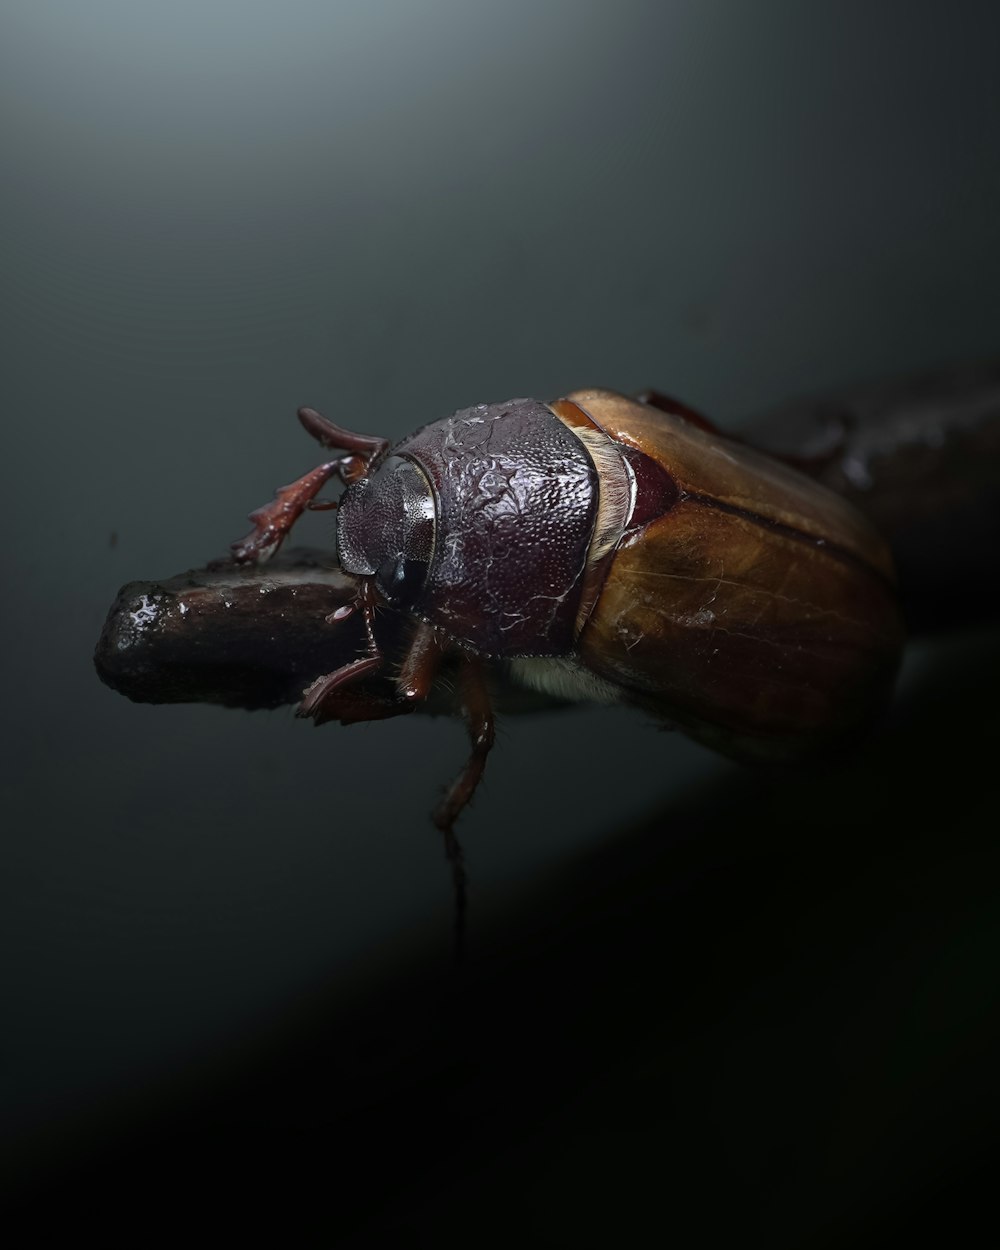 a close up of a bug on a black surface